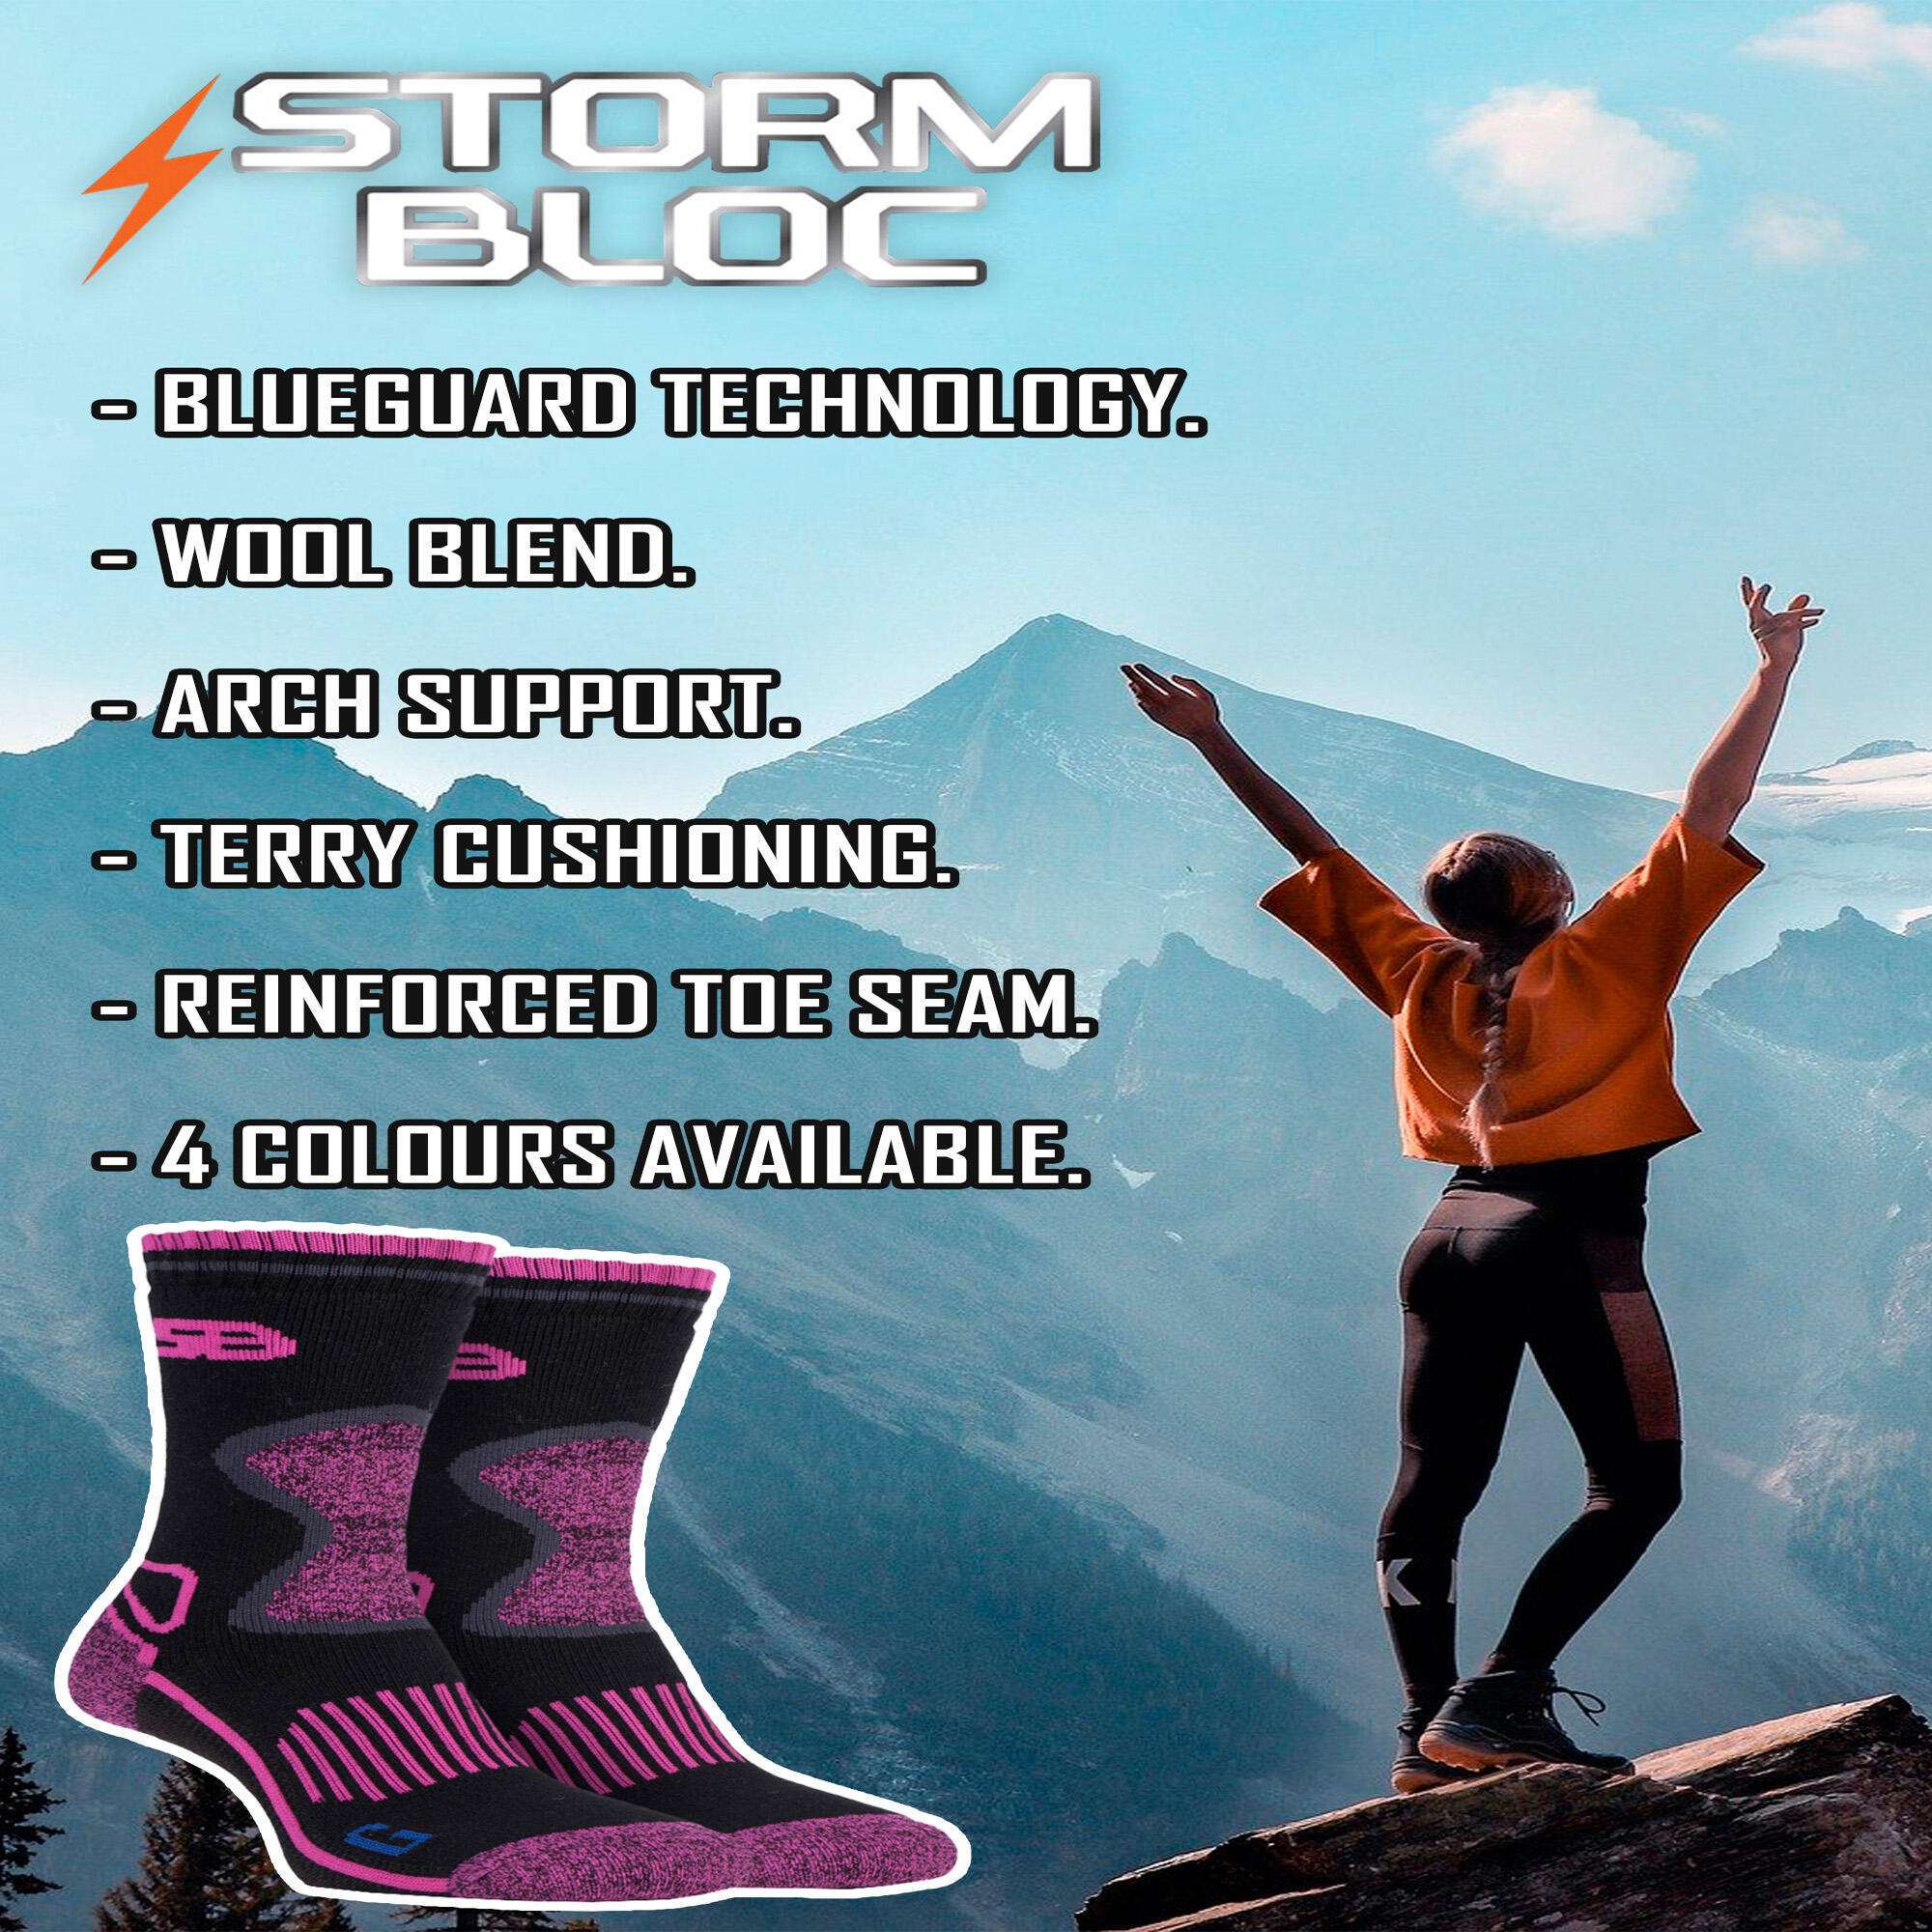 2 Pairs Ladies Cushioned Wool Blend Hiking Socks with Arch Support 3/3